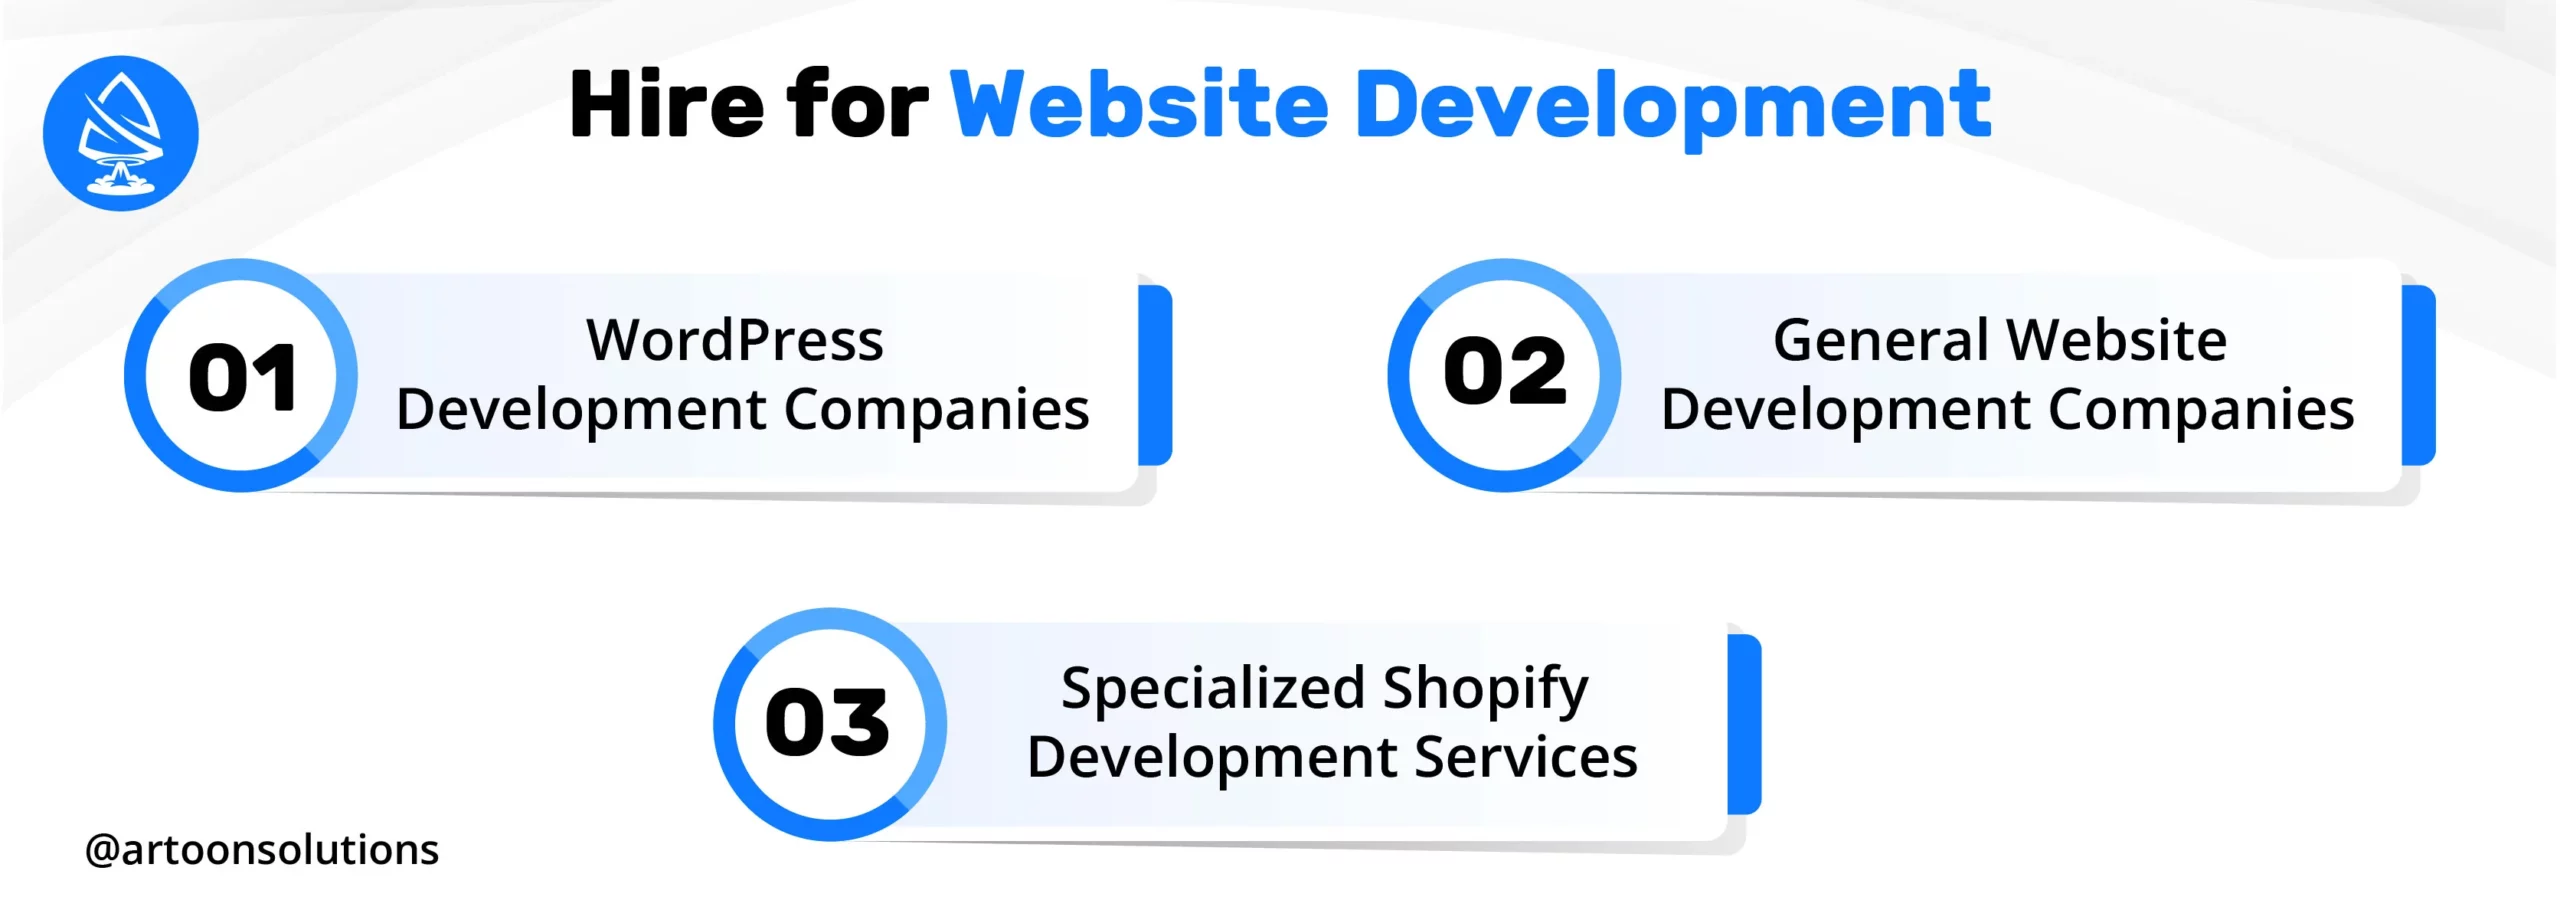 Website Development and Functionality 